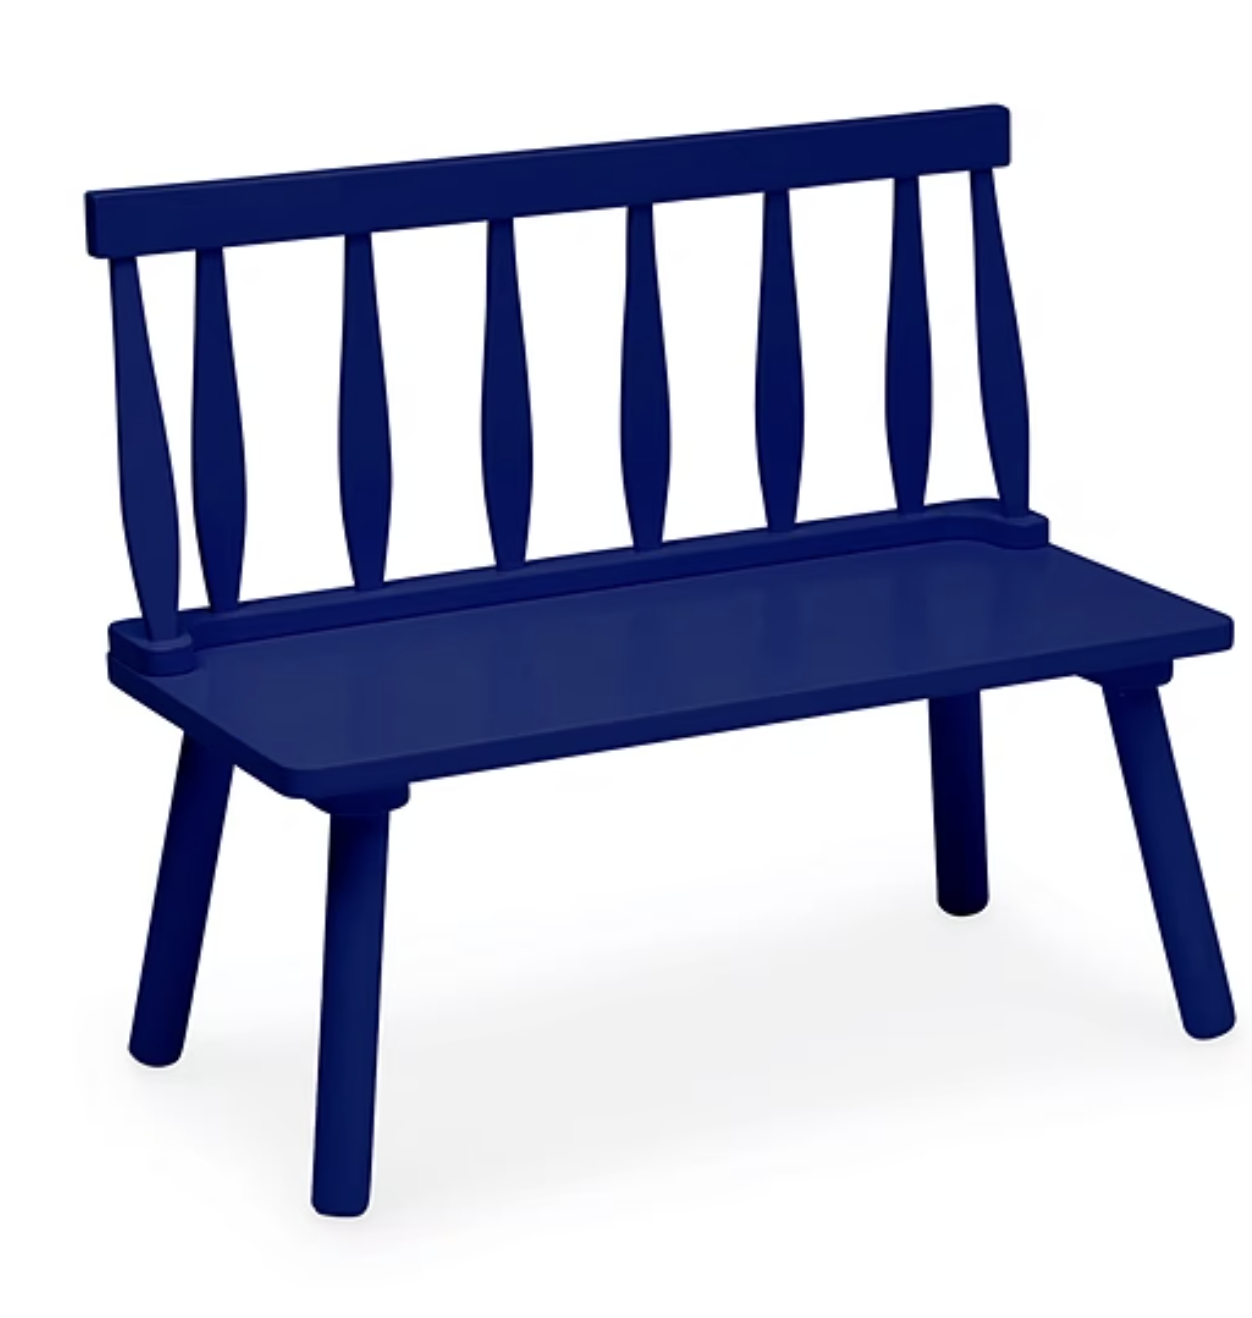 JCPenney: Up to 60% Off Furniture, Mattresses, & Window + Free Delivery thru 11/12, Kids Wooden Bench $64